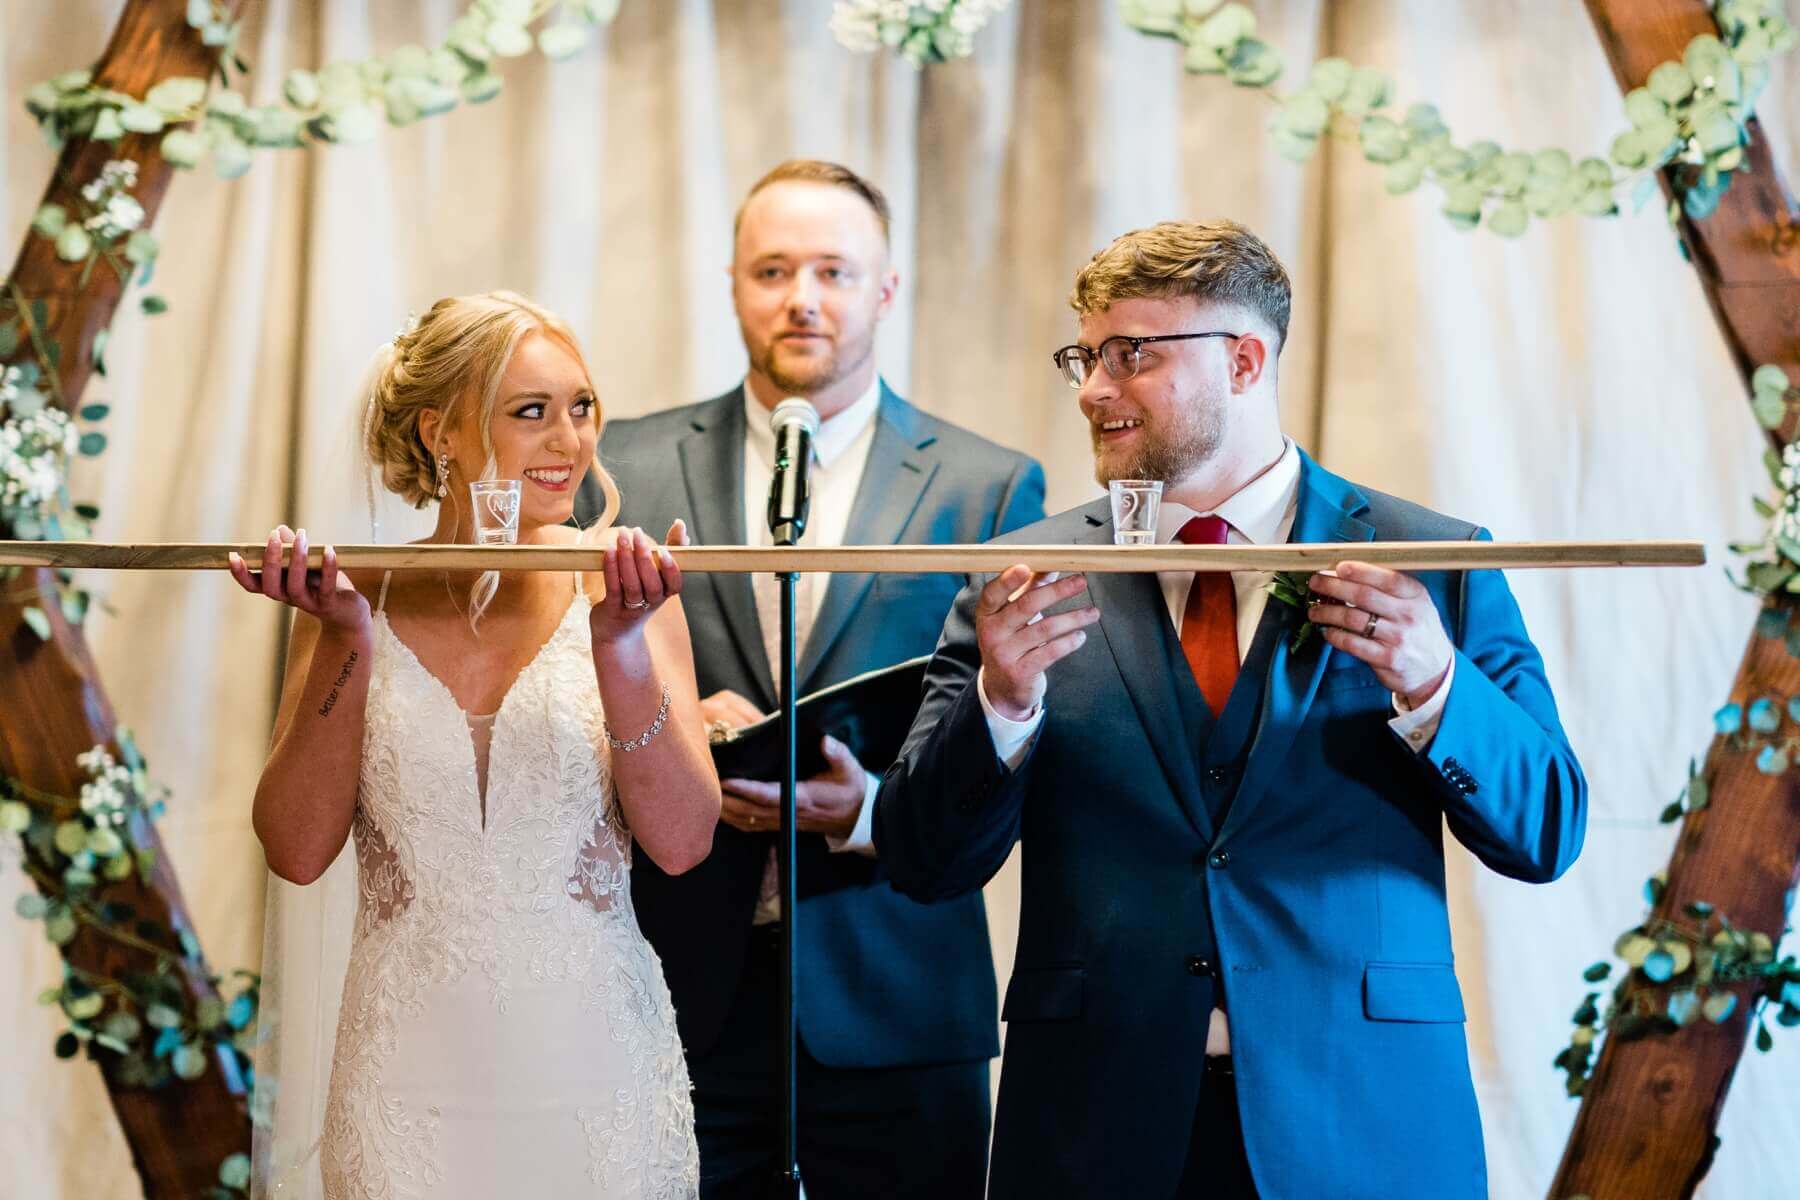 Bride and groom looking at each other before doing a shotski